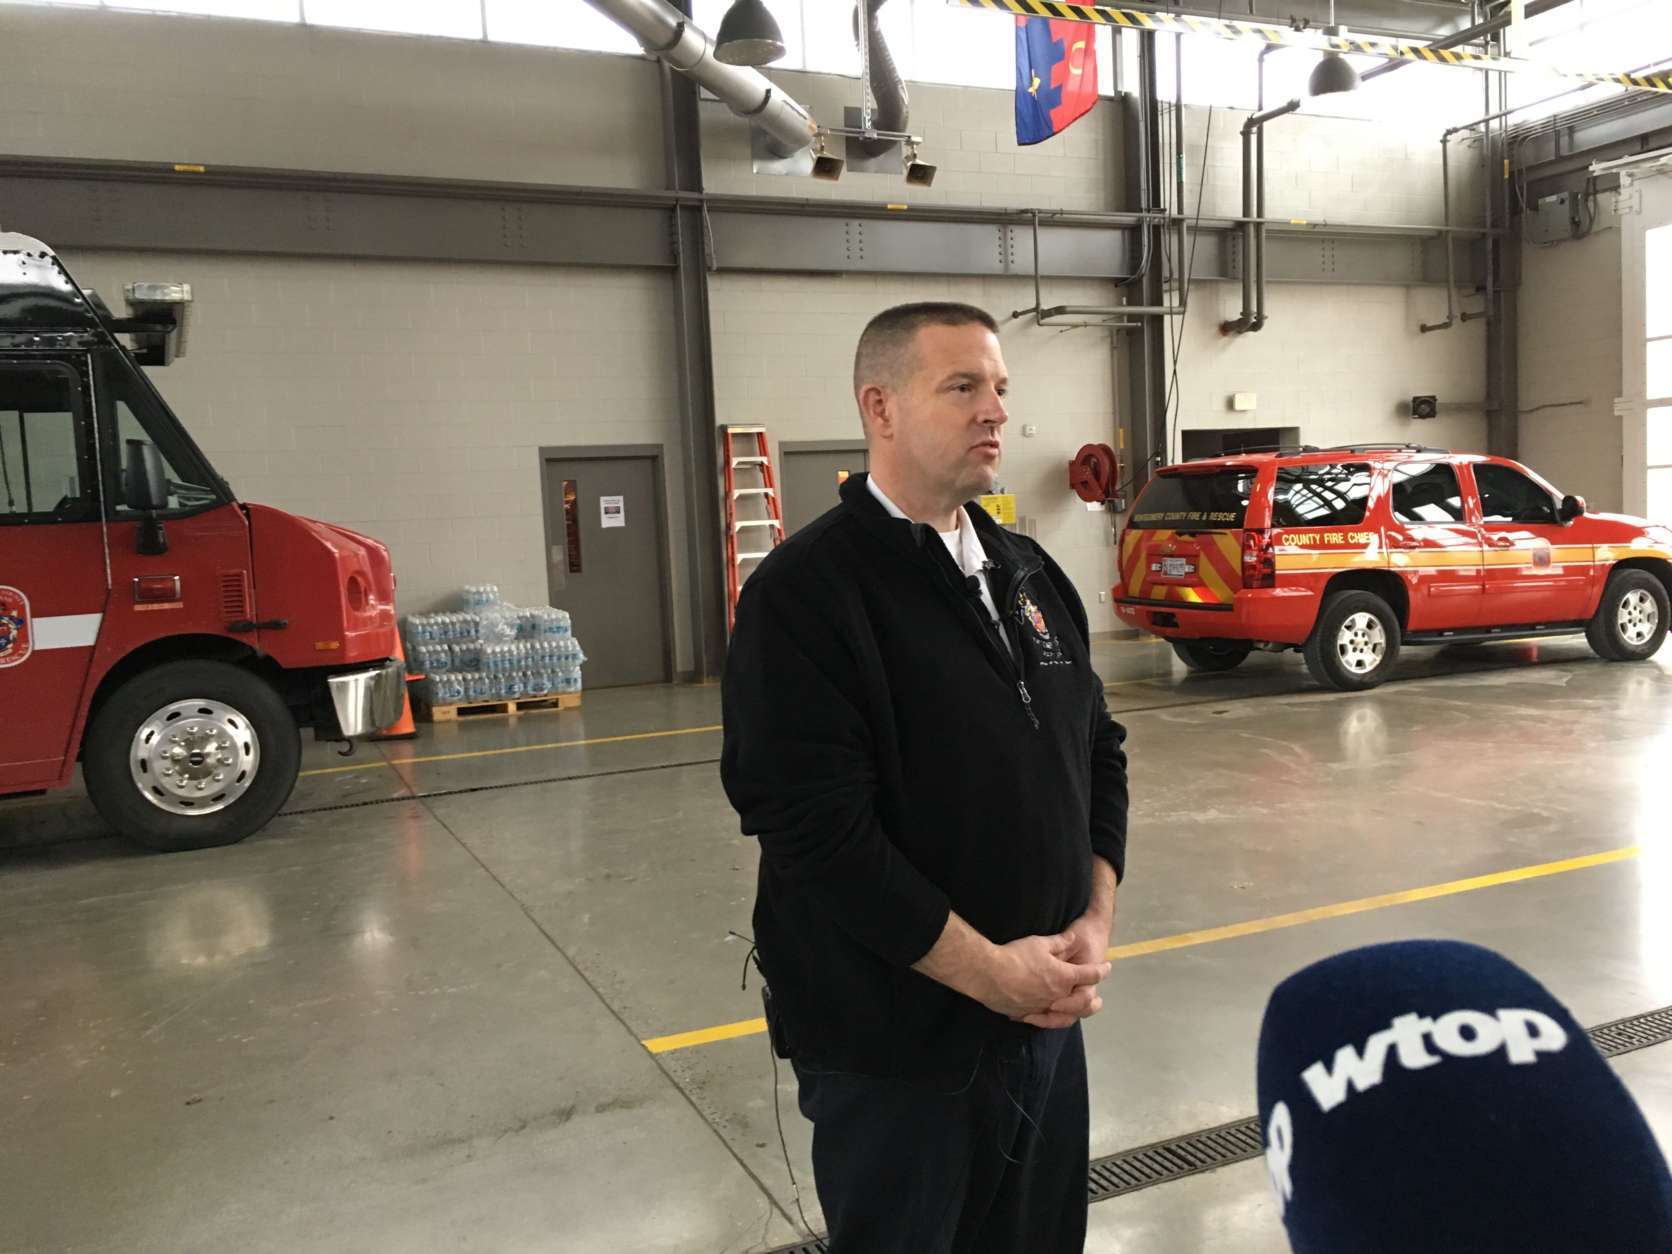 Montgomery County Fire Chief Scott Goldstein reminds residents that fire prevention is key during cold snaps as well as throughout the year. He said it's best to keep up with maintenance such as chimney and flue cleaning and inspection. (WTOP/Liz Anderson)